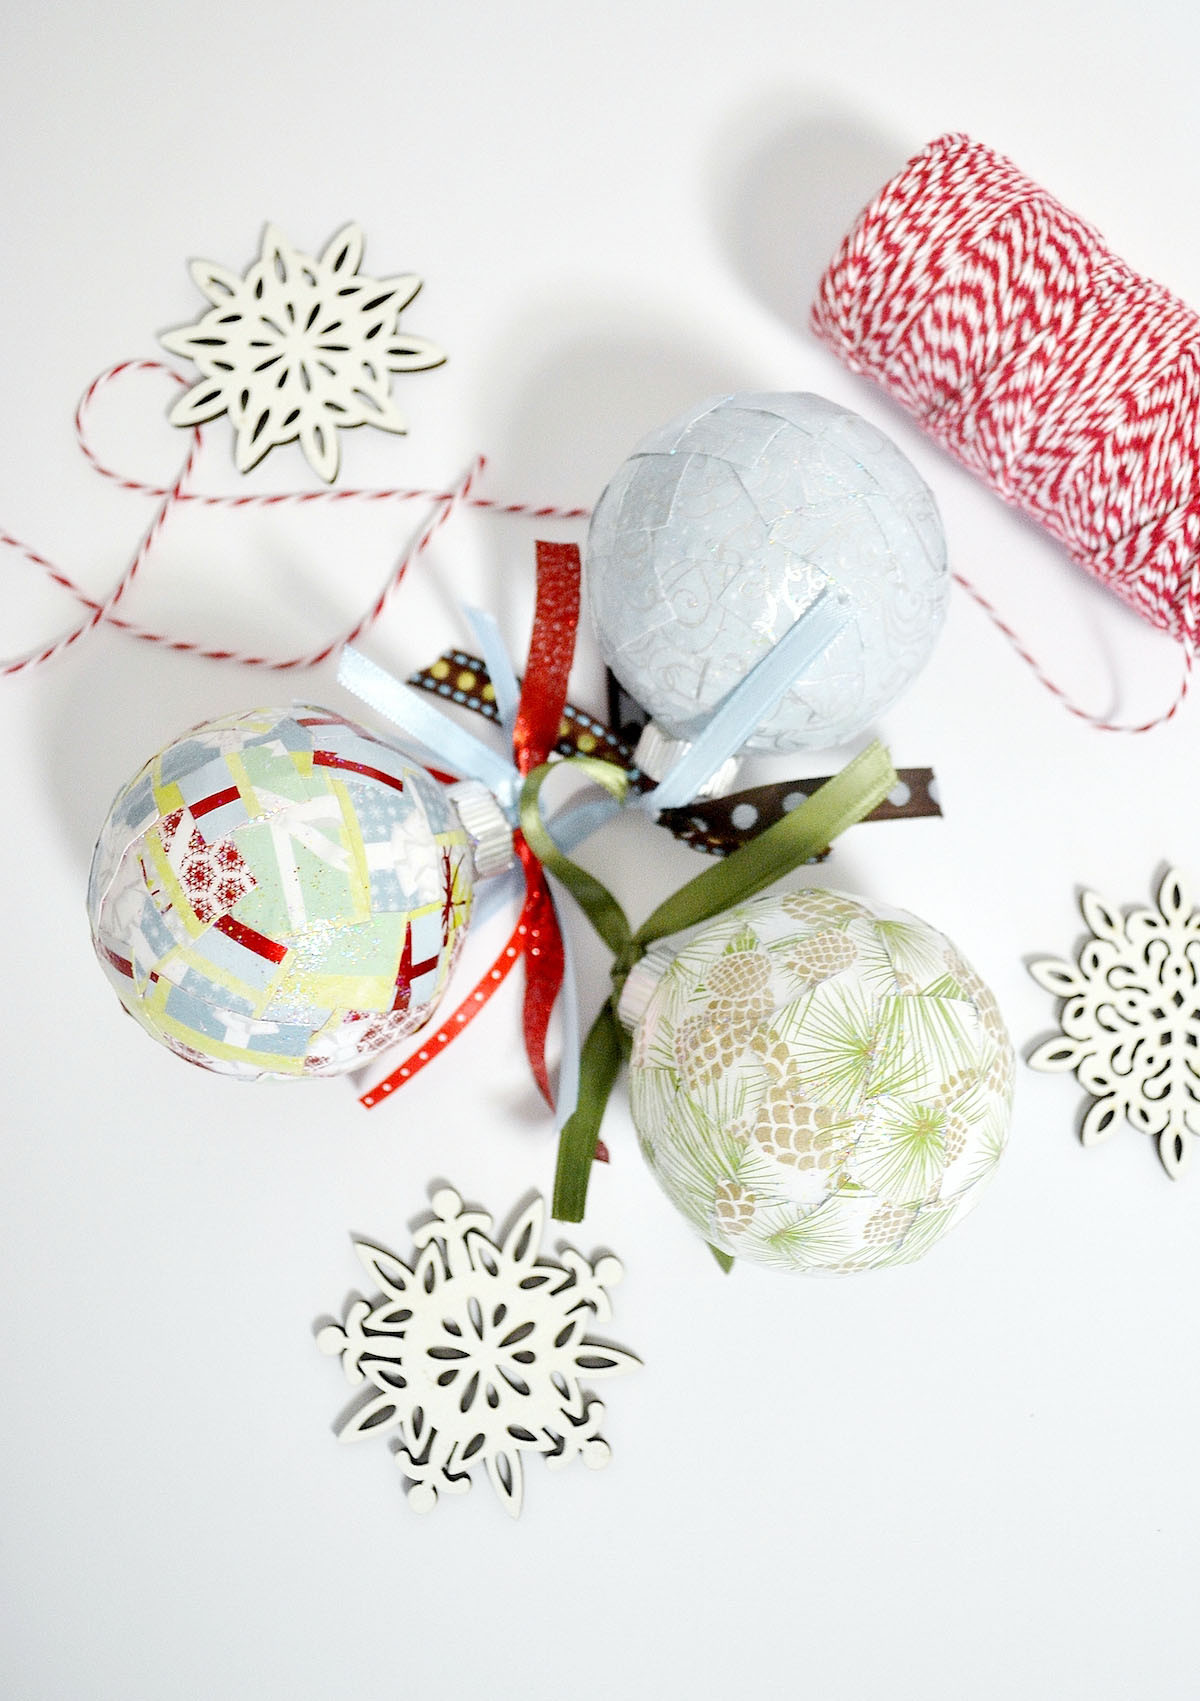 Easy DIY Christmas Ornaments
 50 DIY Paper Christmas Ornaments To Create With The Kids